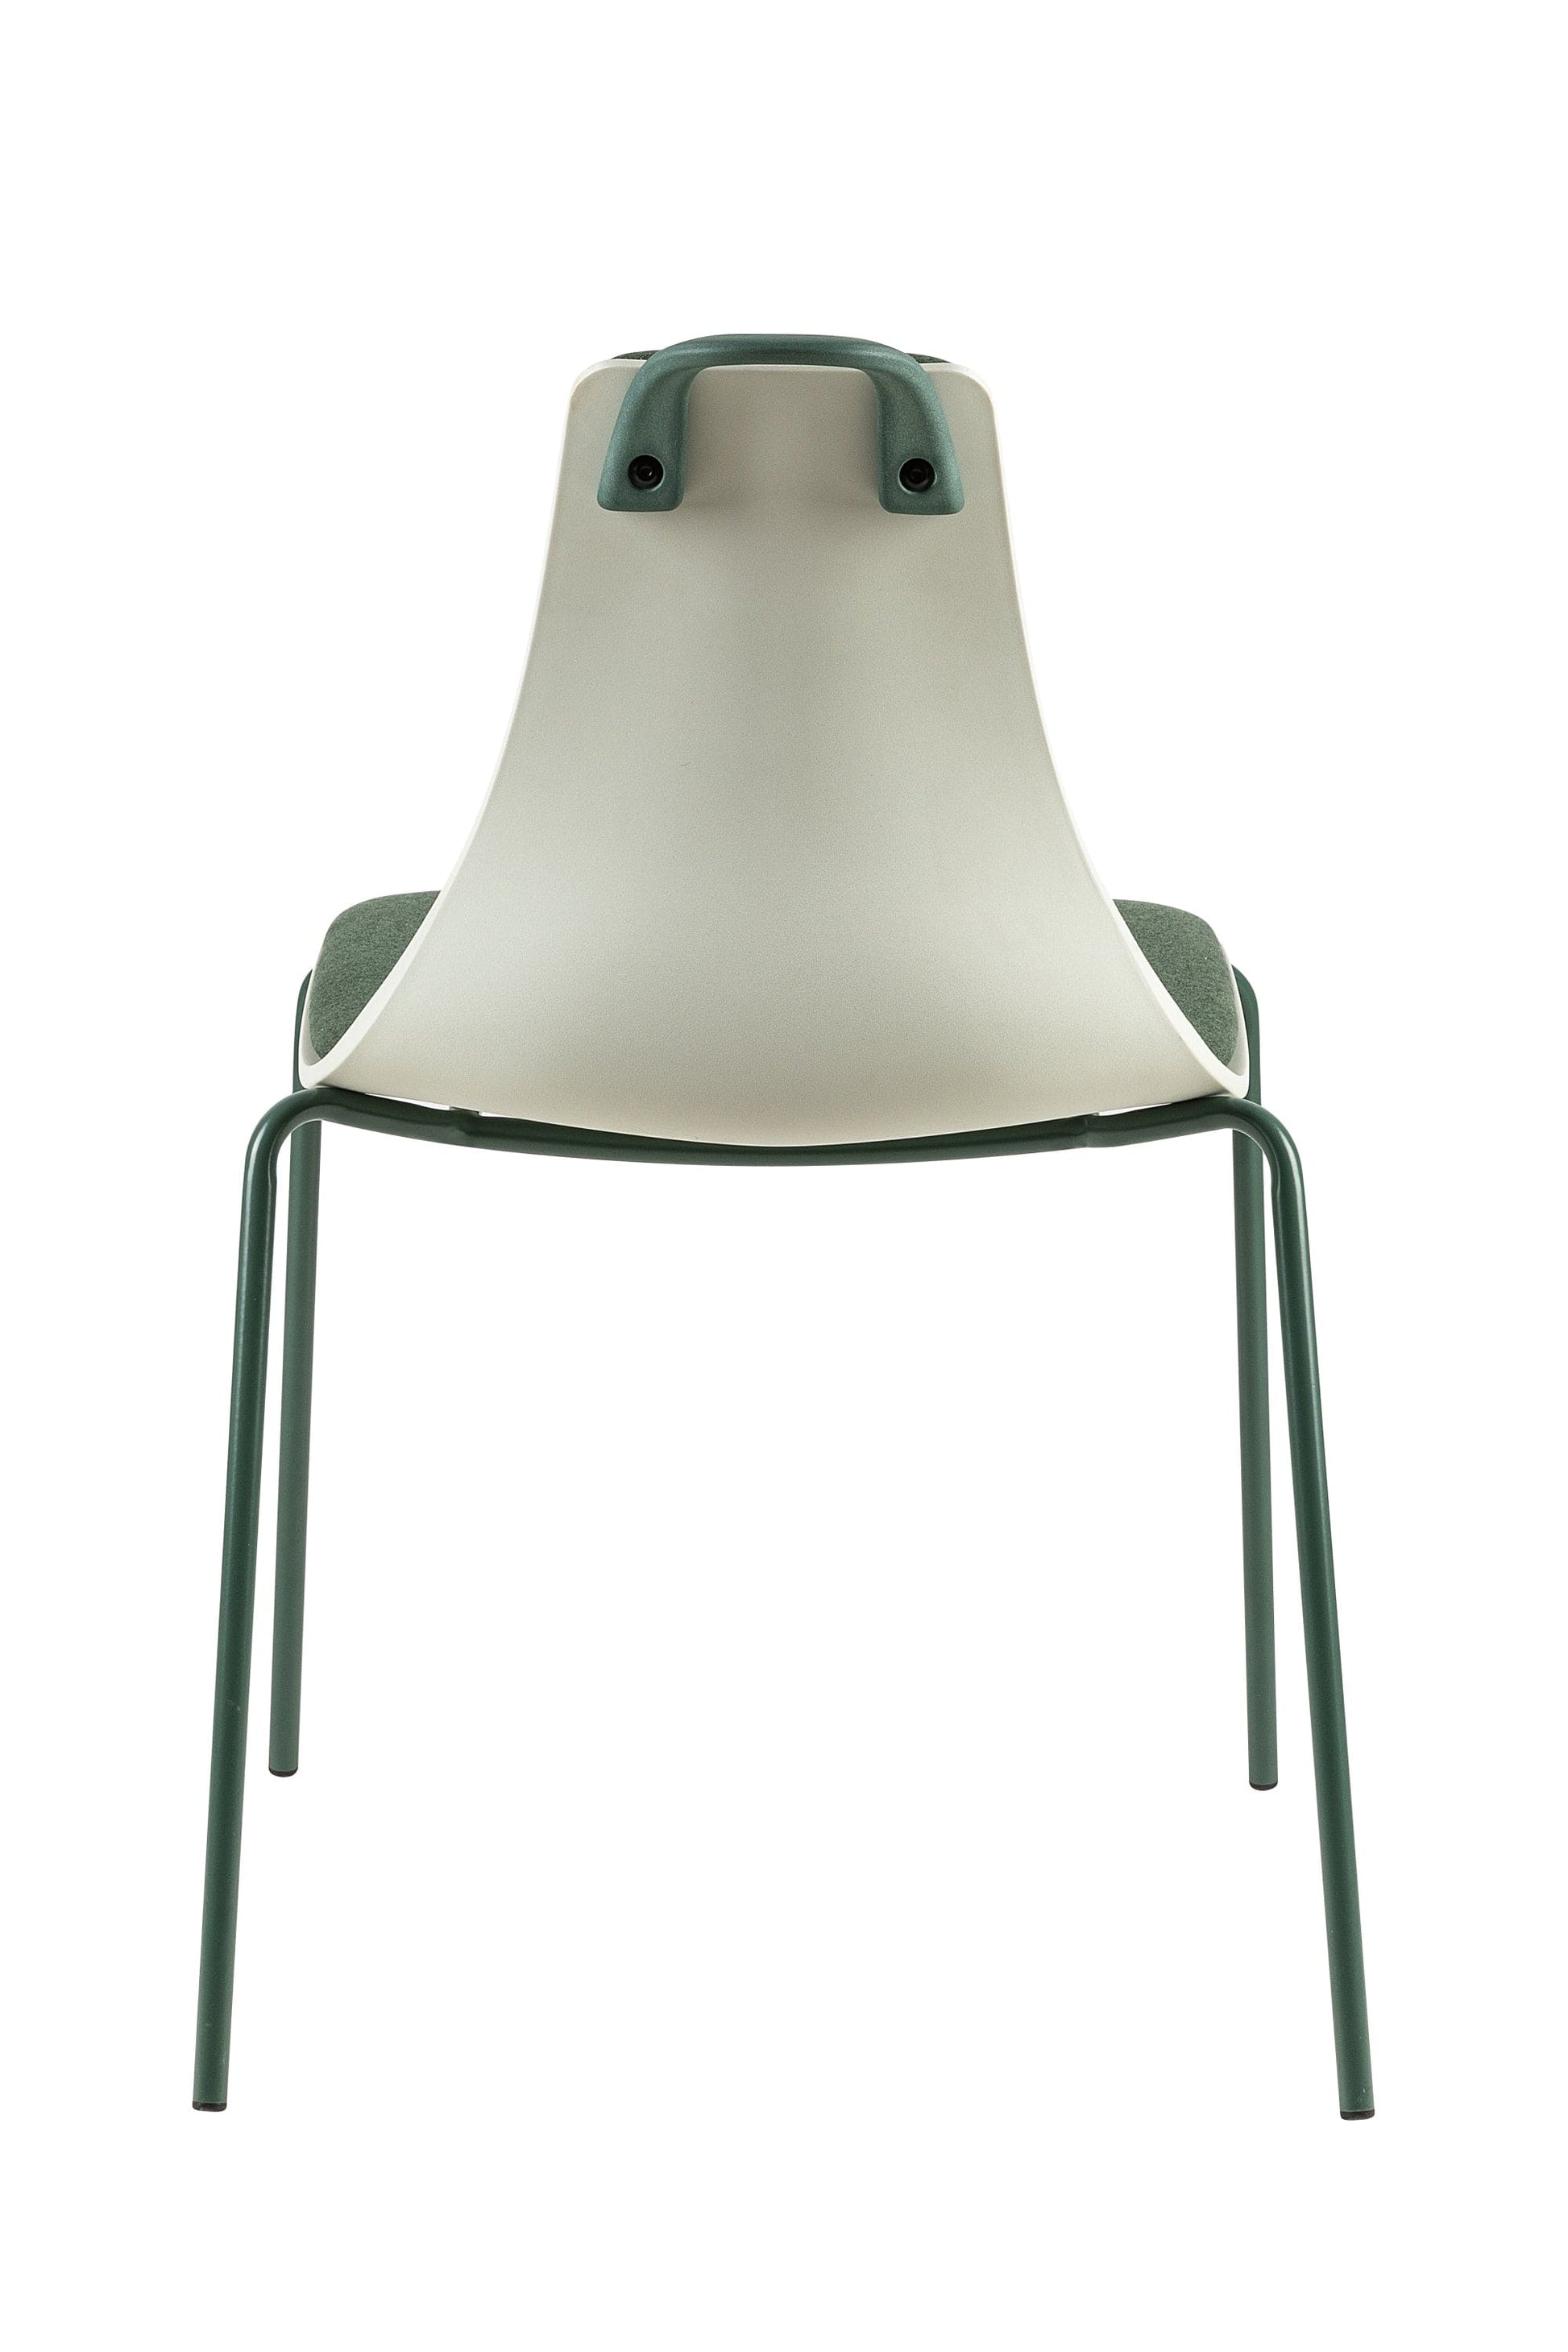 1st Choice Furniture Direct Chairs 1st Choice Set of 2 Green Leisure Chair Set w/ 15° Tilt and Iron Foot